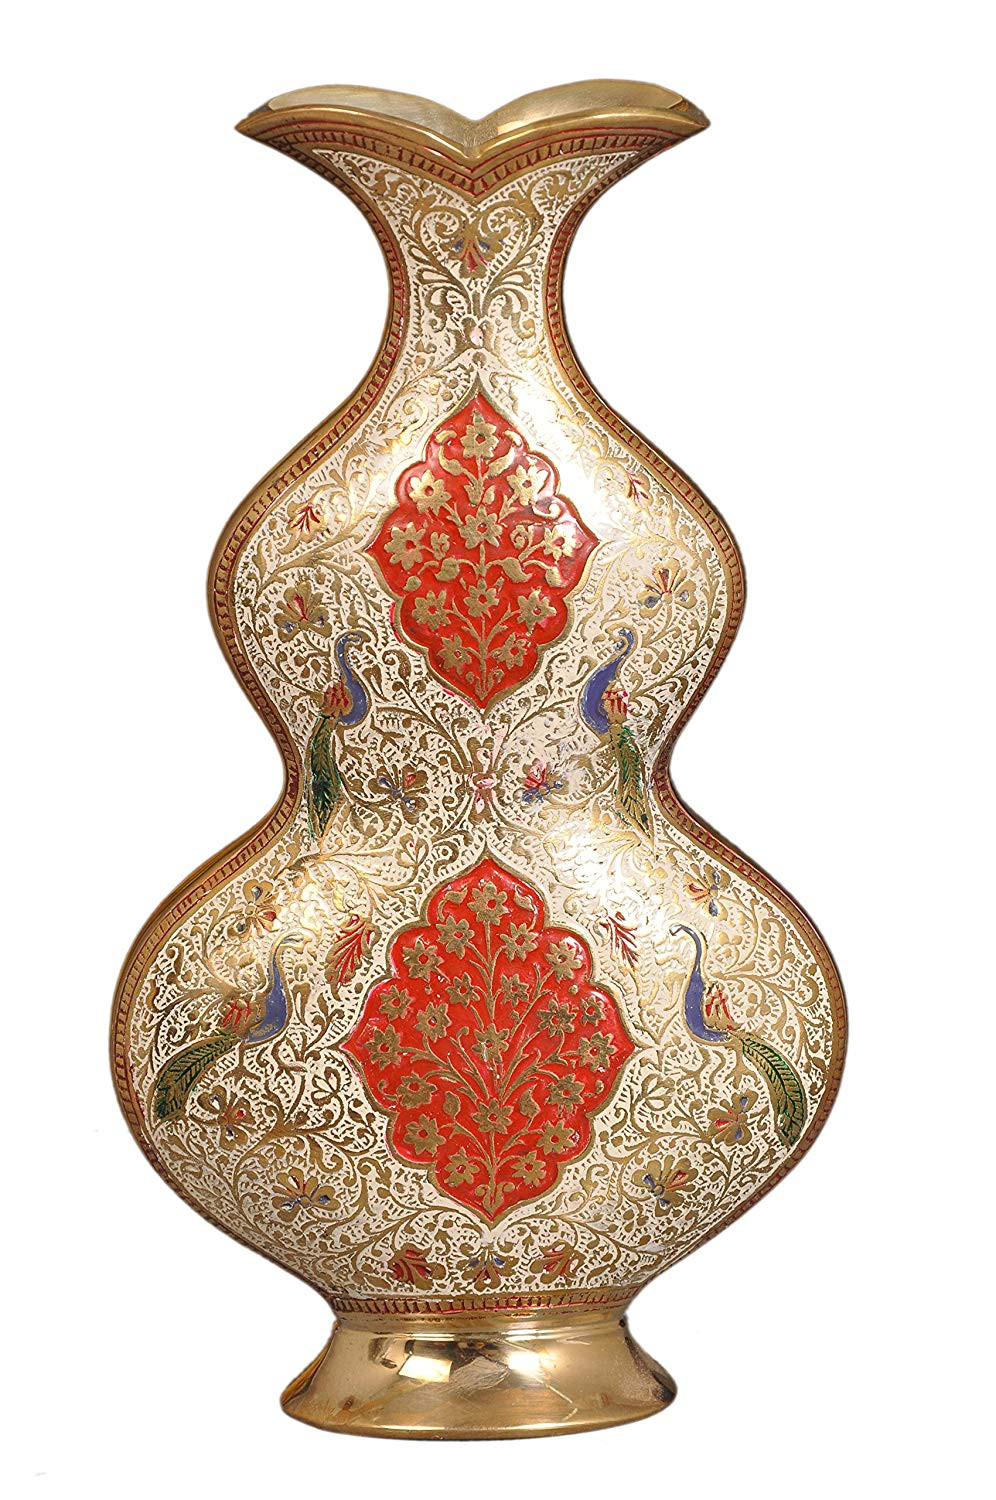 20 Cute Antique Brass Vase Made In India 2023 free download antique brass vase made in india of buy nutristar beautiful home ddecorative flower vase brass inside buy nutristar beautiful home ddecorative flower vase brass traditional red online at low